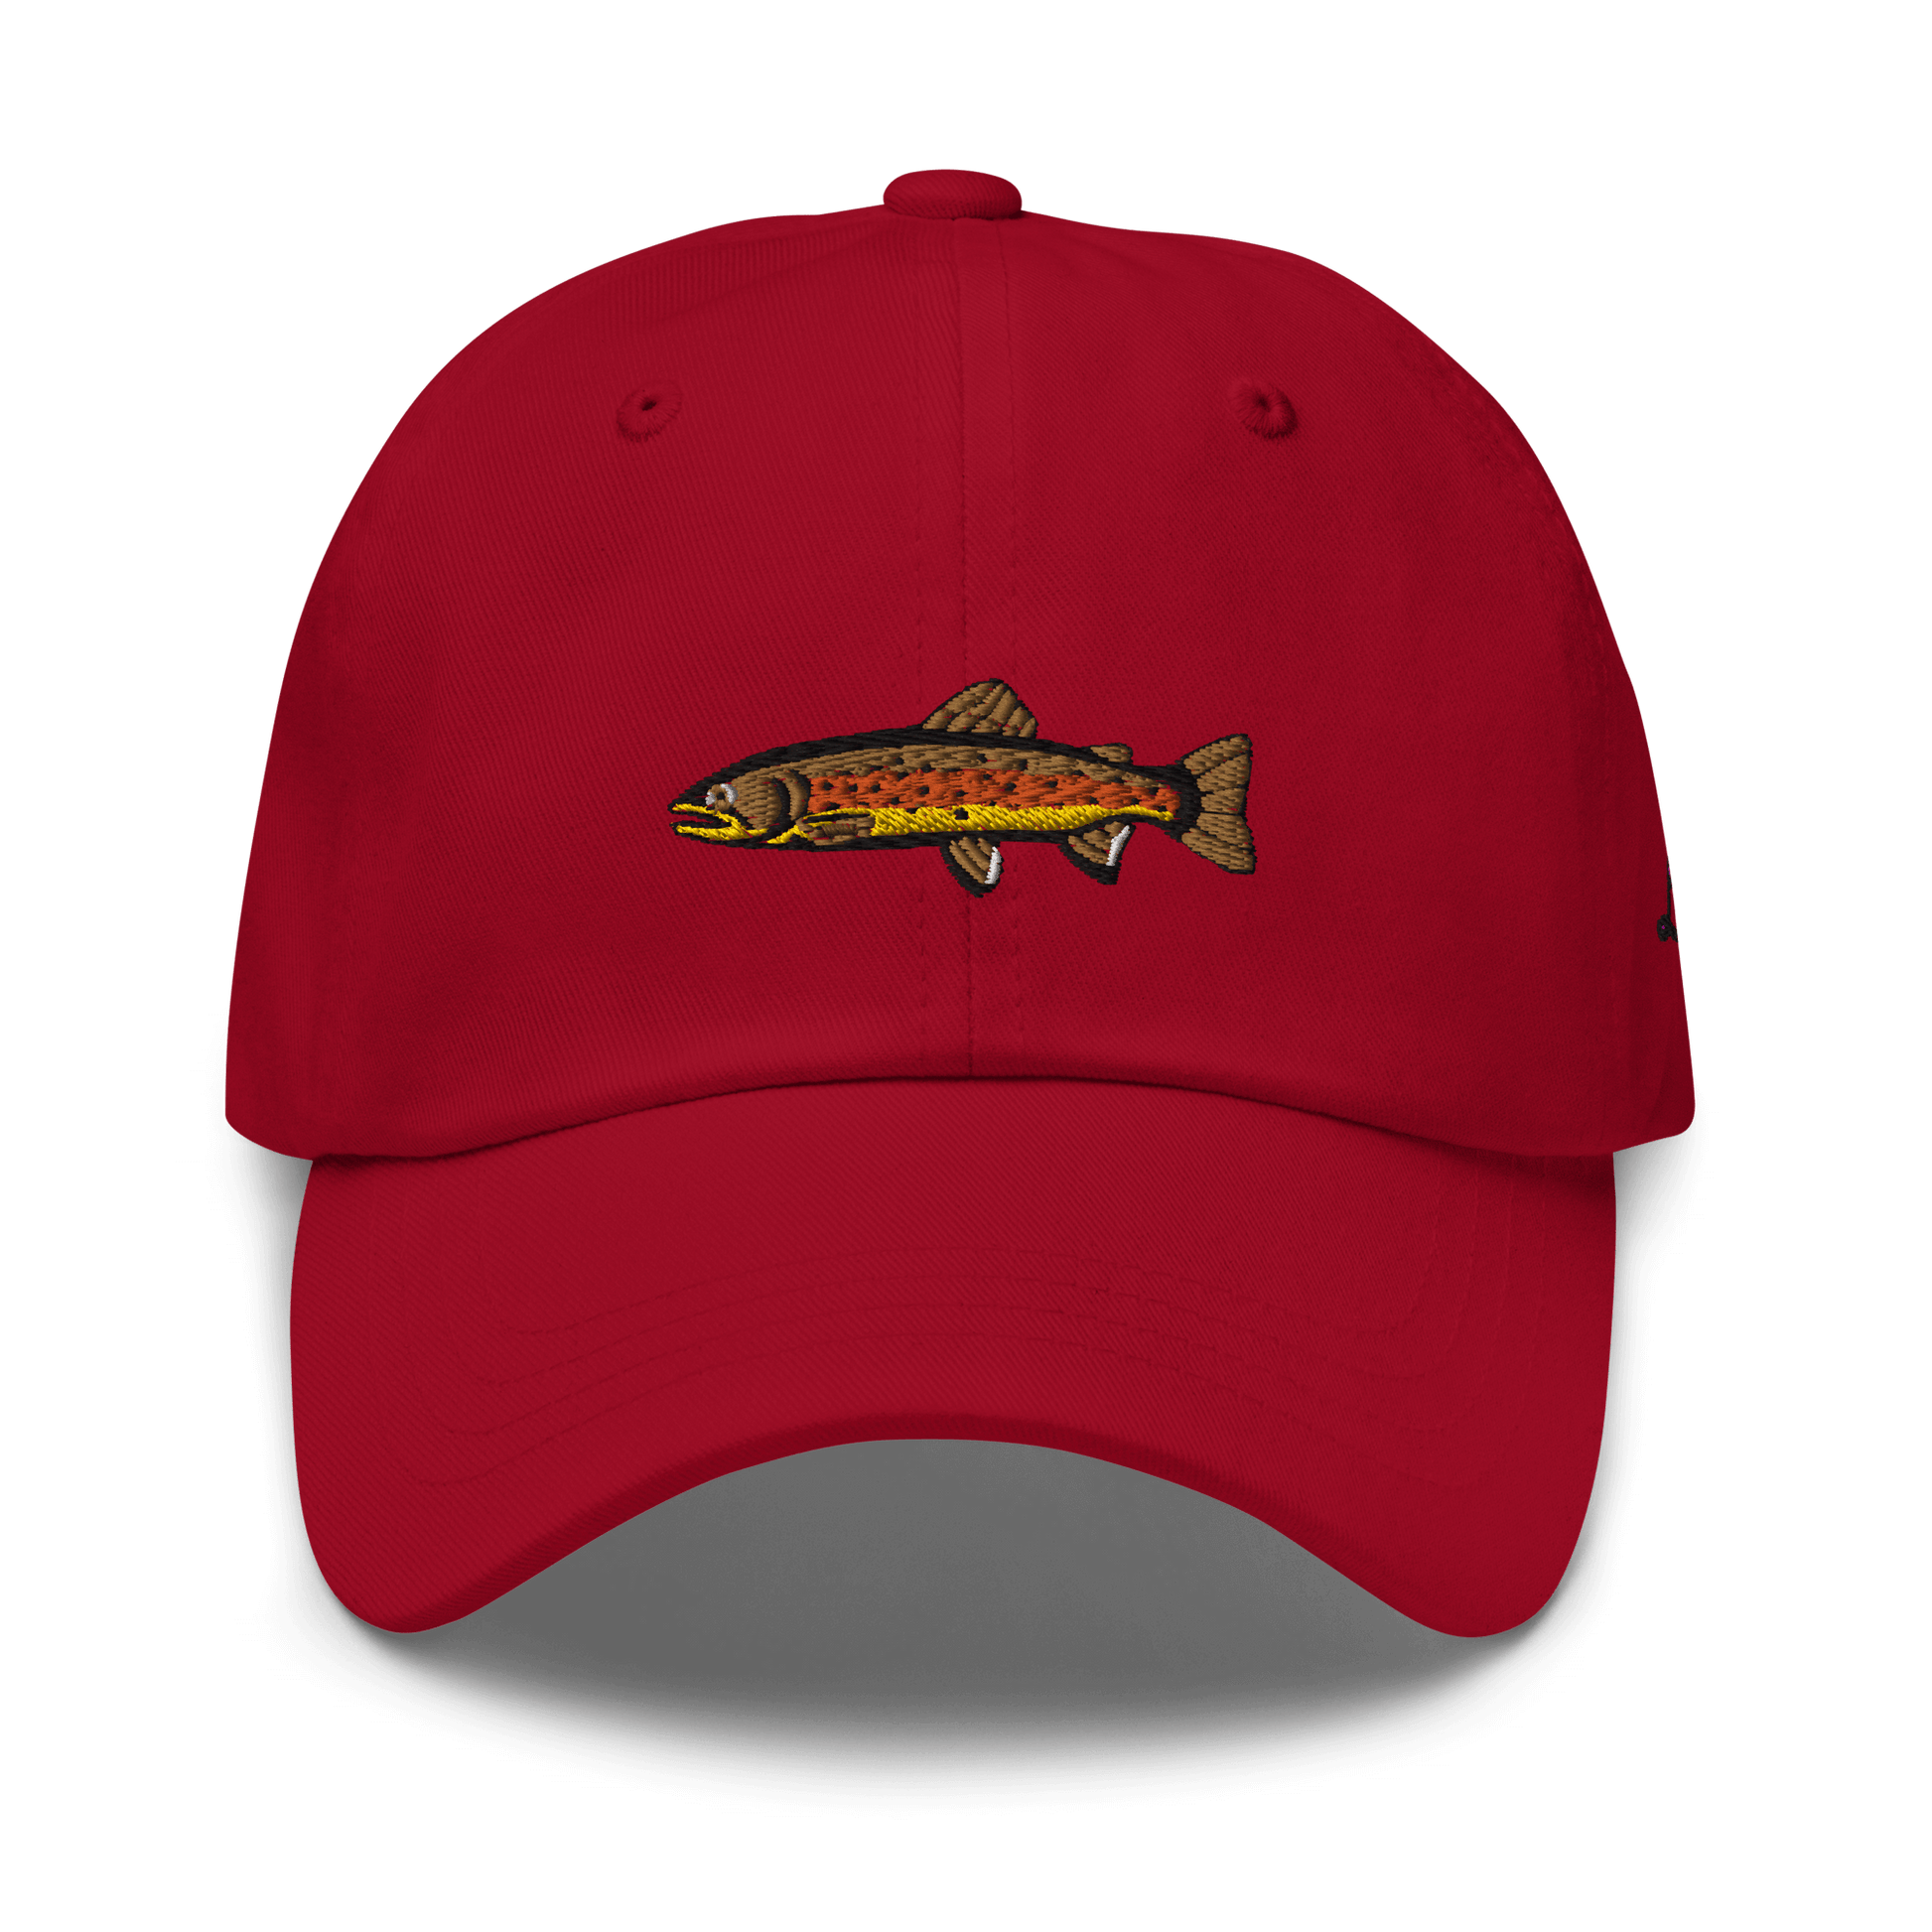 Brown Trout fishing hat. It’s a simple embroidered hat/ dad hat with a brown trout and the lost lure logo on the side. Red, front side